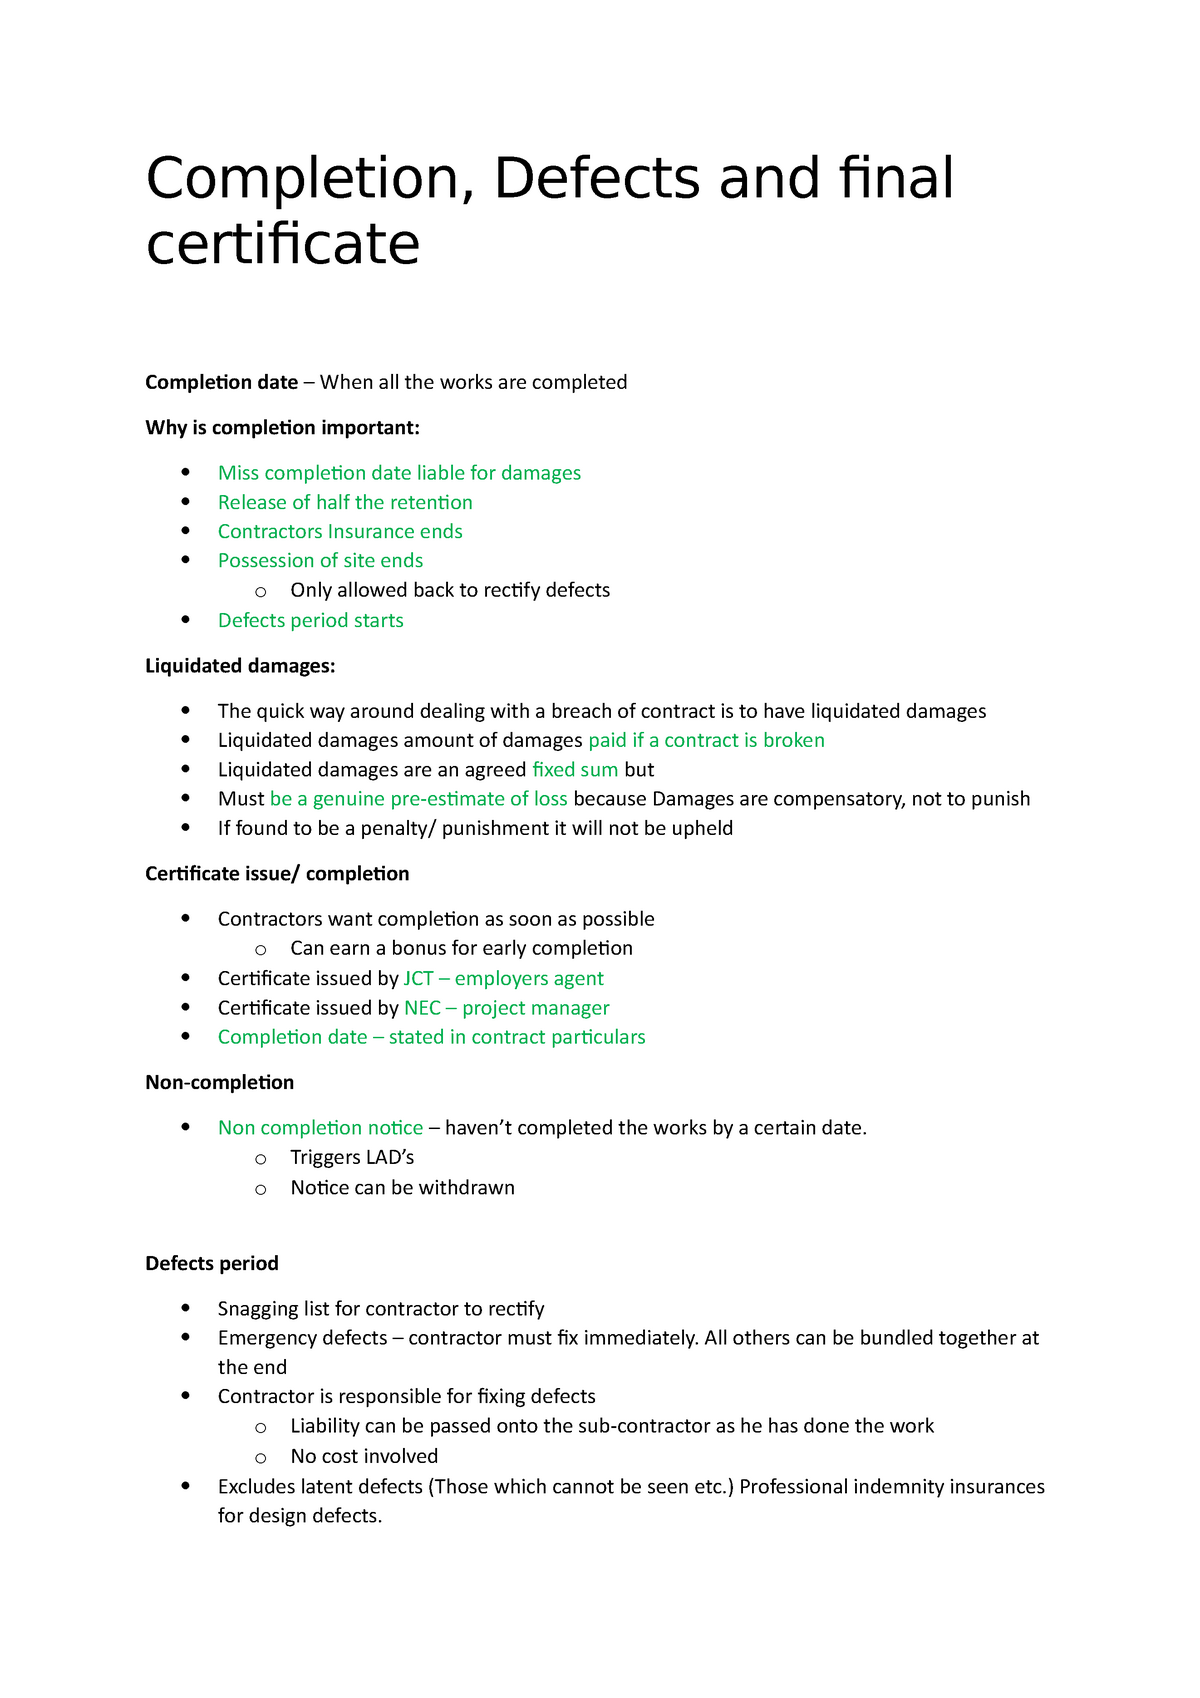 Lecture 5 Completion Defects Final Certificate Completion